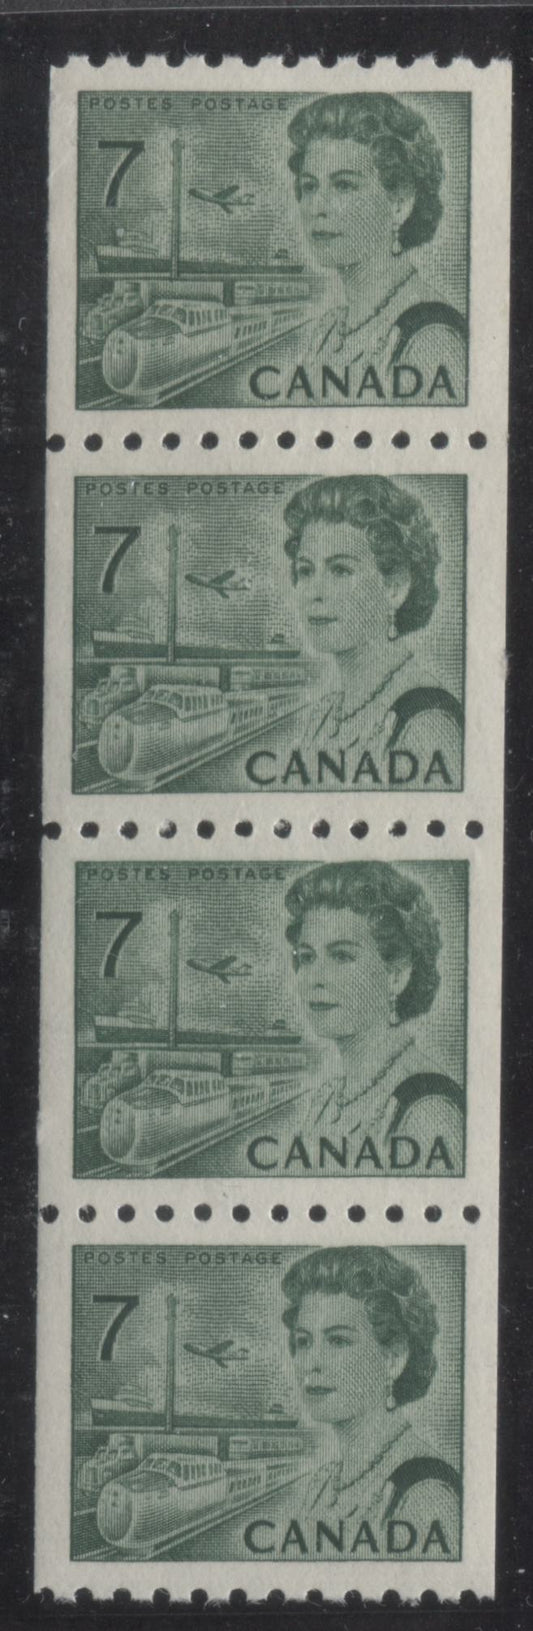 Lot 86 Canada #549 7c Green Queen Elizabeth II, 1967-1973 Centennials, A VFNH Coil Strip Of 4 On Bright White HB10 Paper With Streaky Dex Gum, Black On Light Blue Under UV, Jump Between 2/3